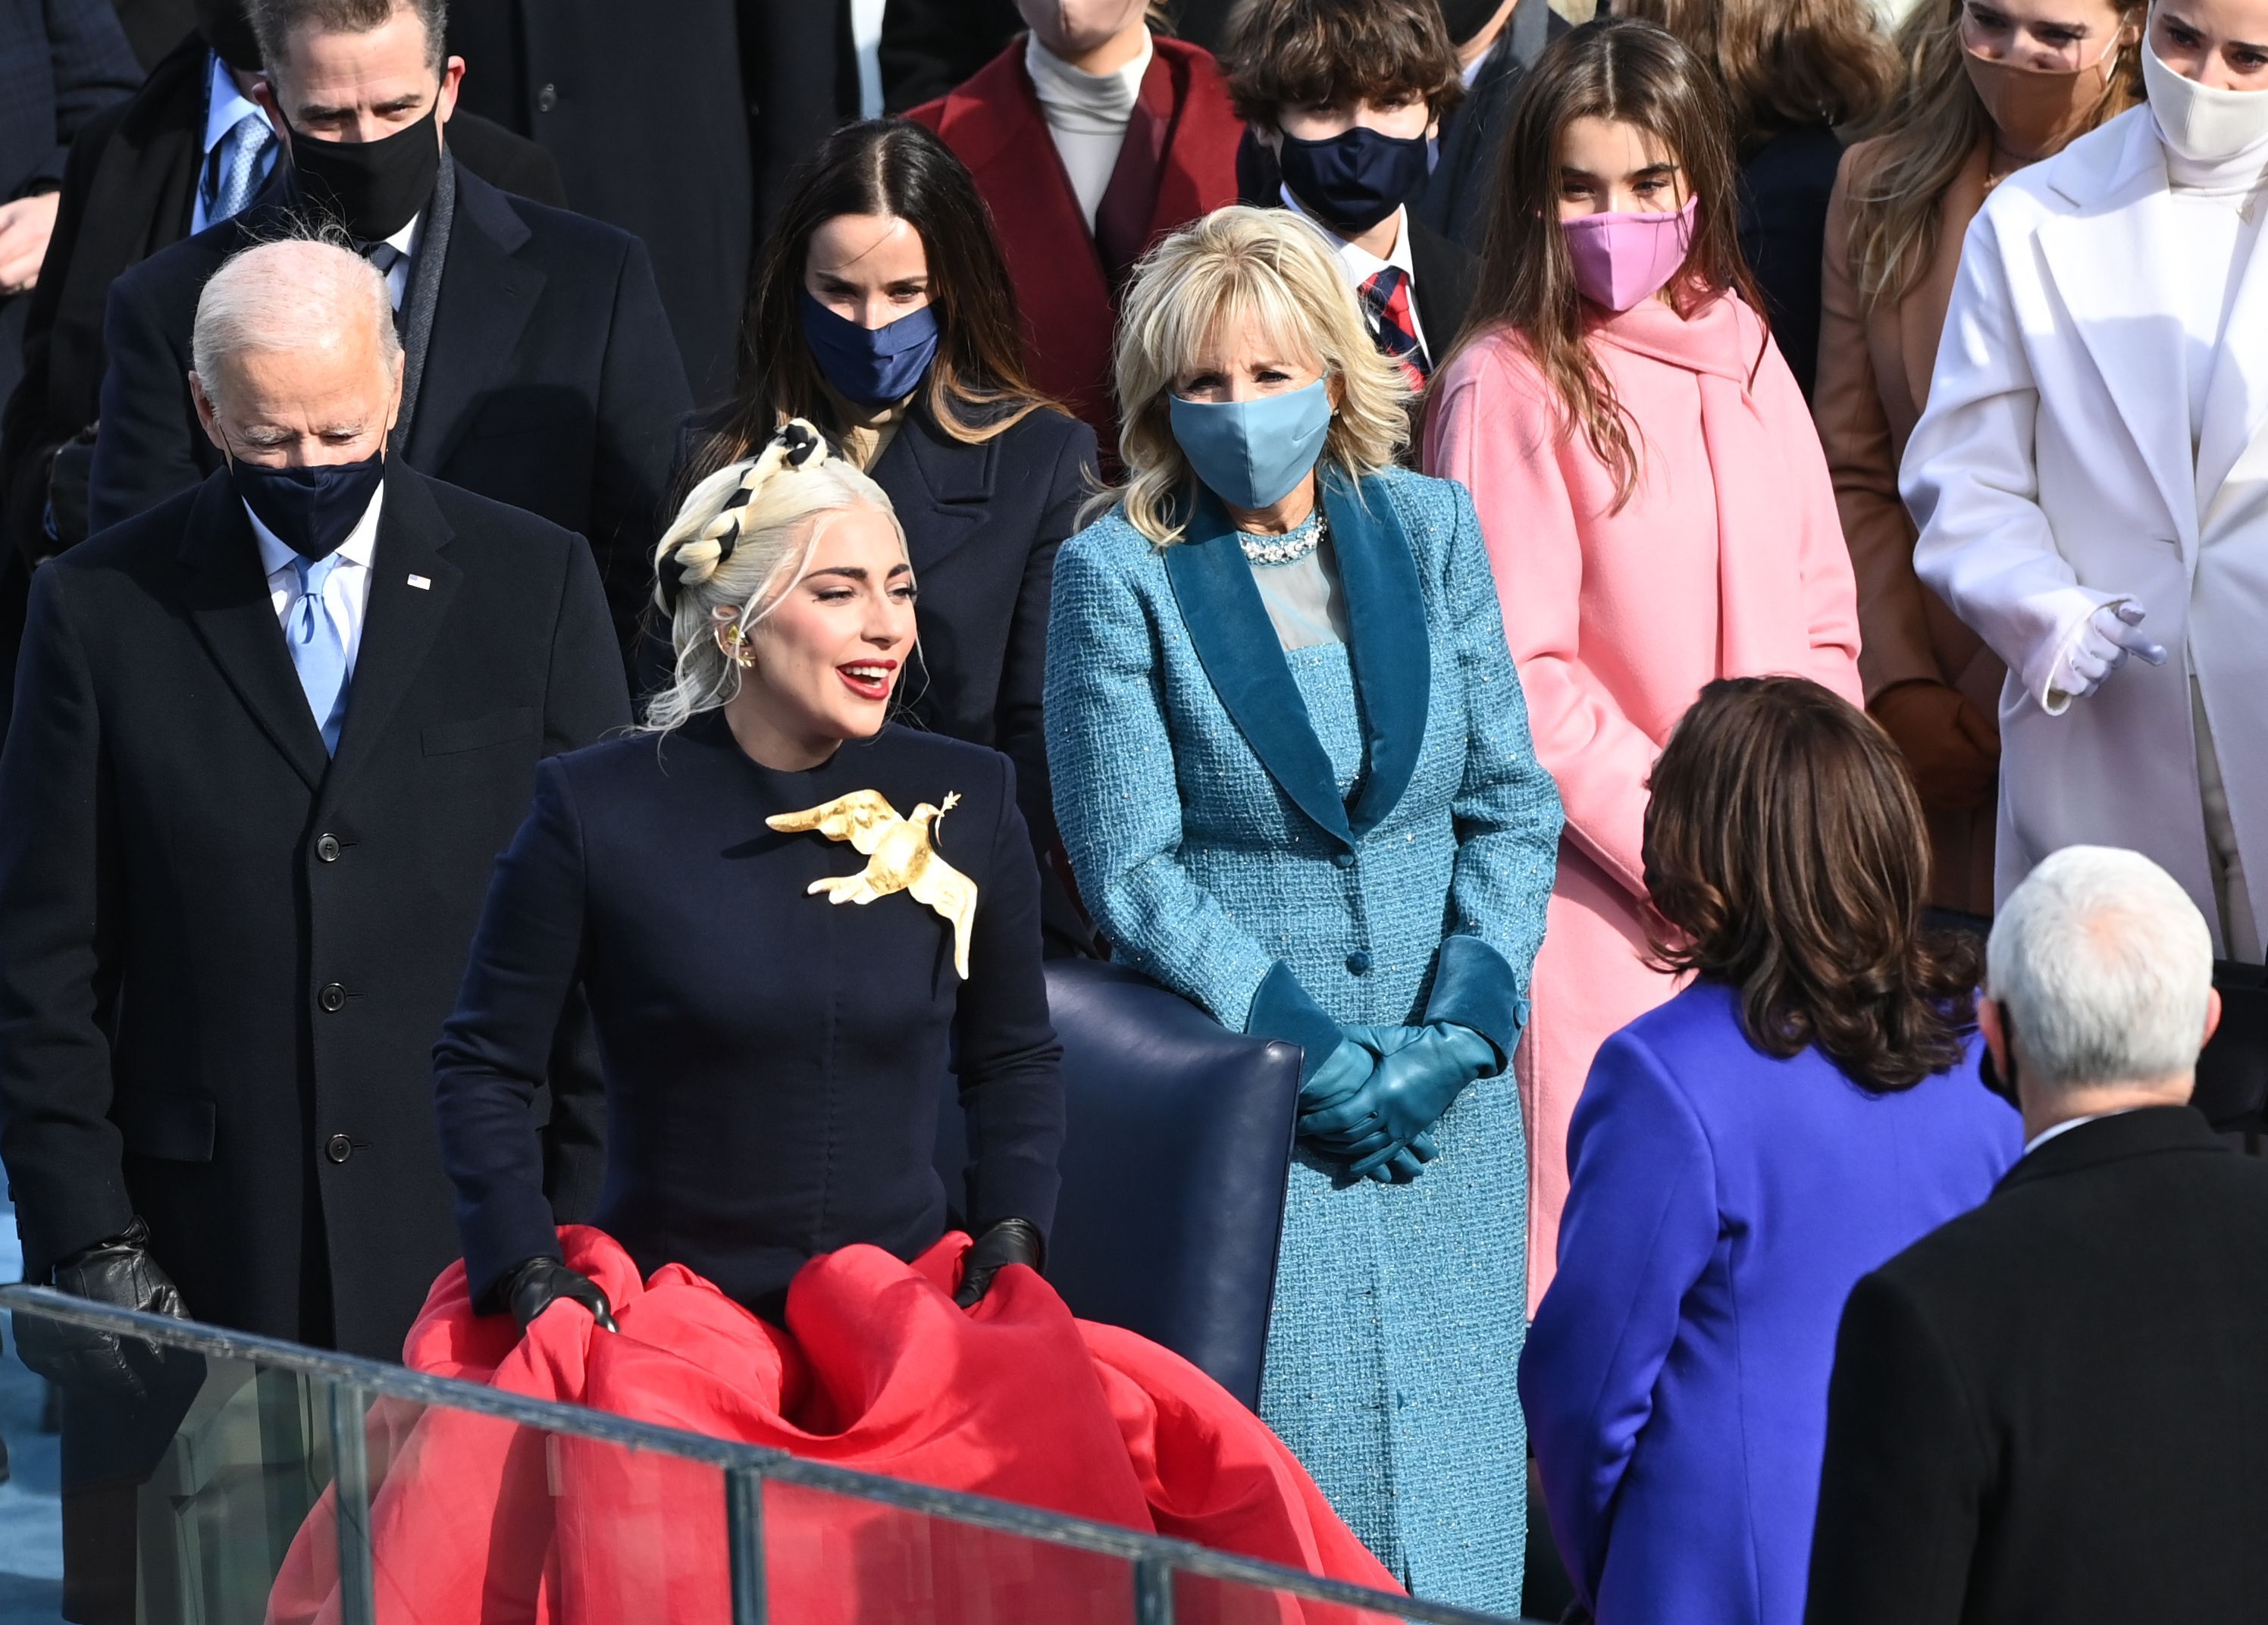 US Singer Lady Gaga arrives to sing the US National Anthem during the 59th Presidential Inaguruation on January 20, 2021, at the US Capitol in Washington, DC. (Photo by Brendan SMIALOWSKI / AFP)